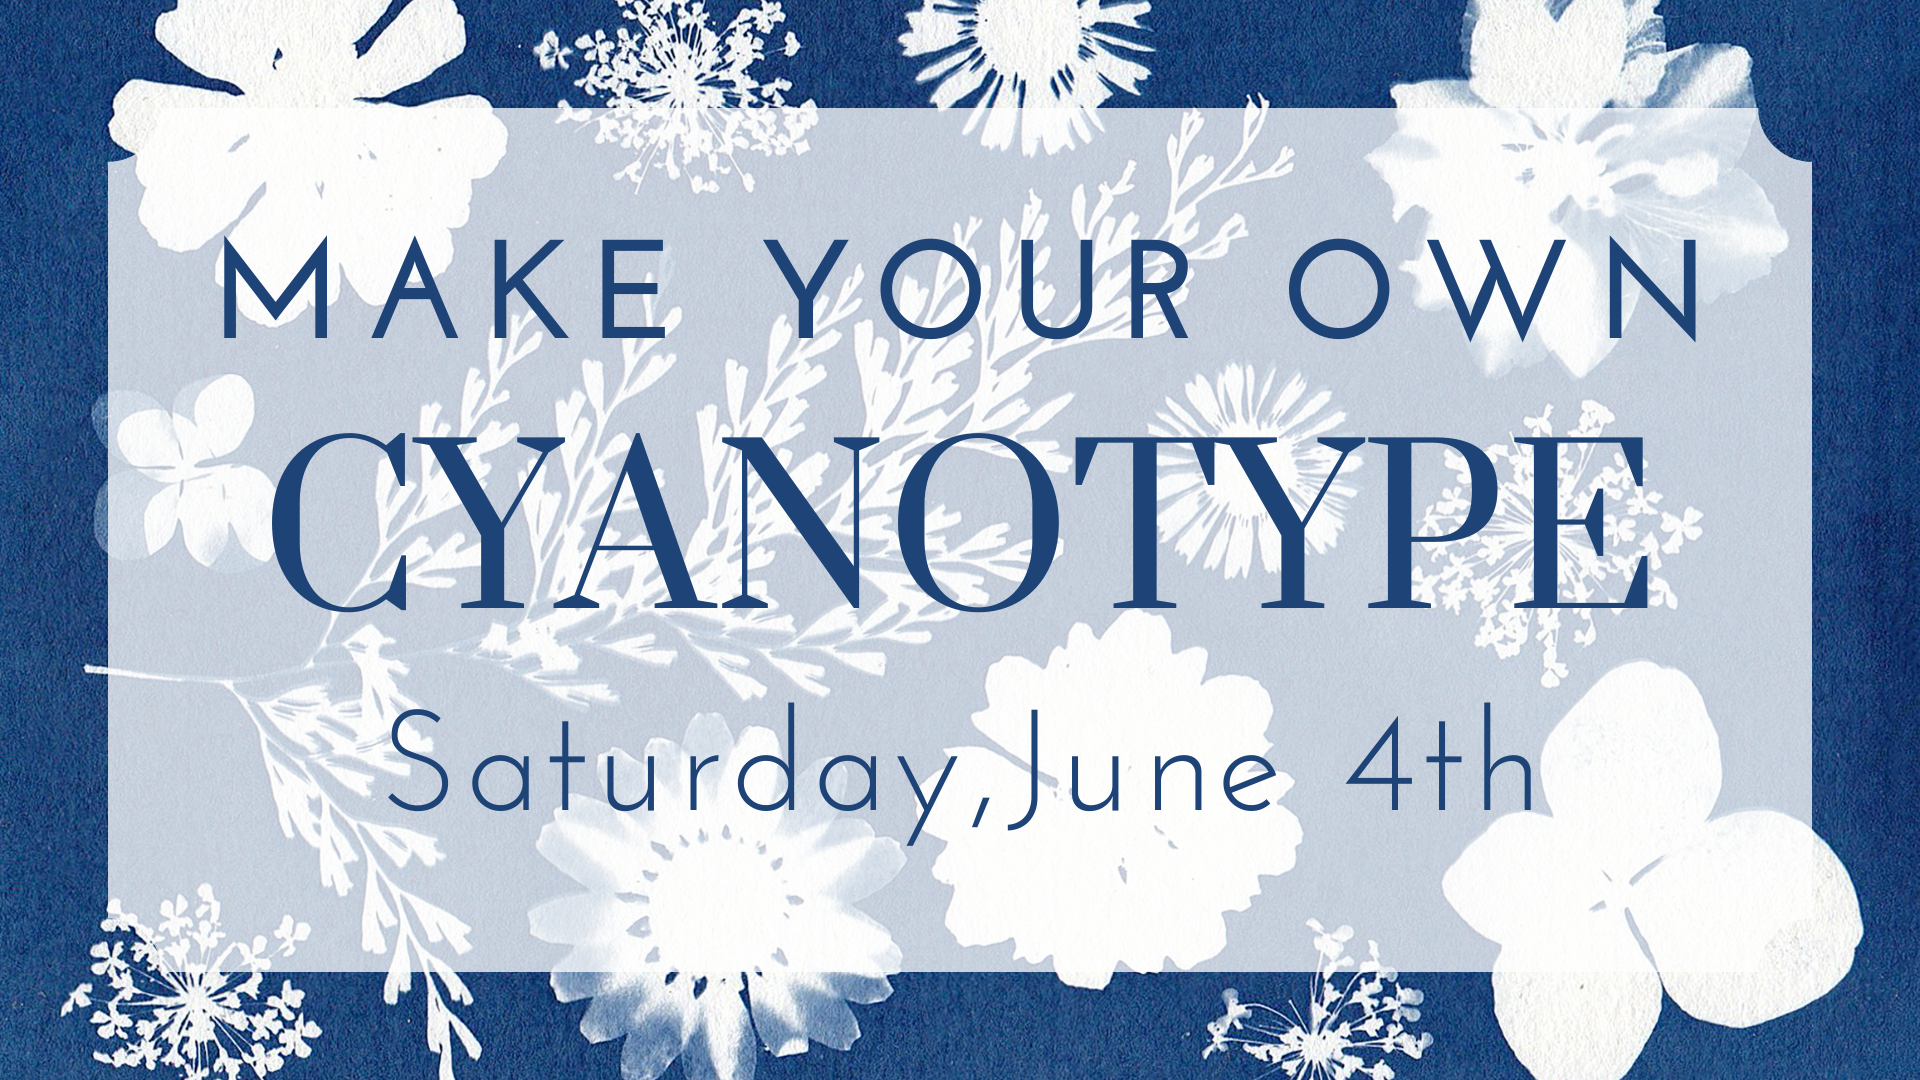 Make Your Own Cyanotype, Saturday, June 4th